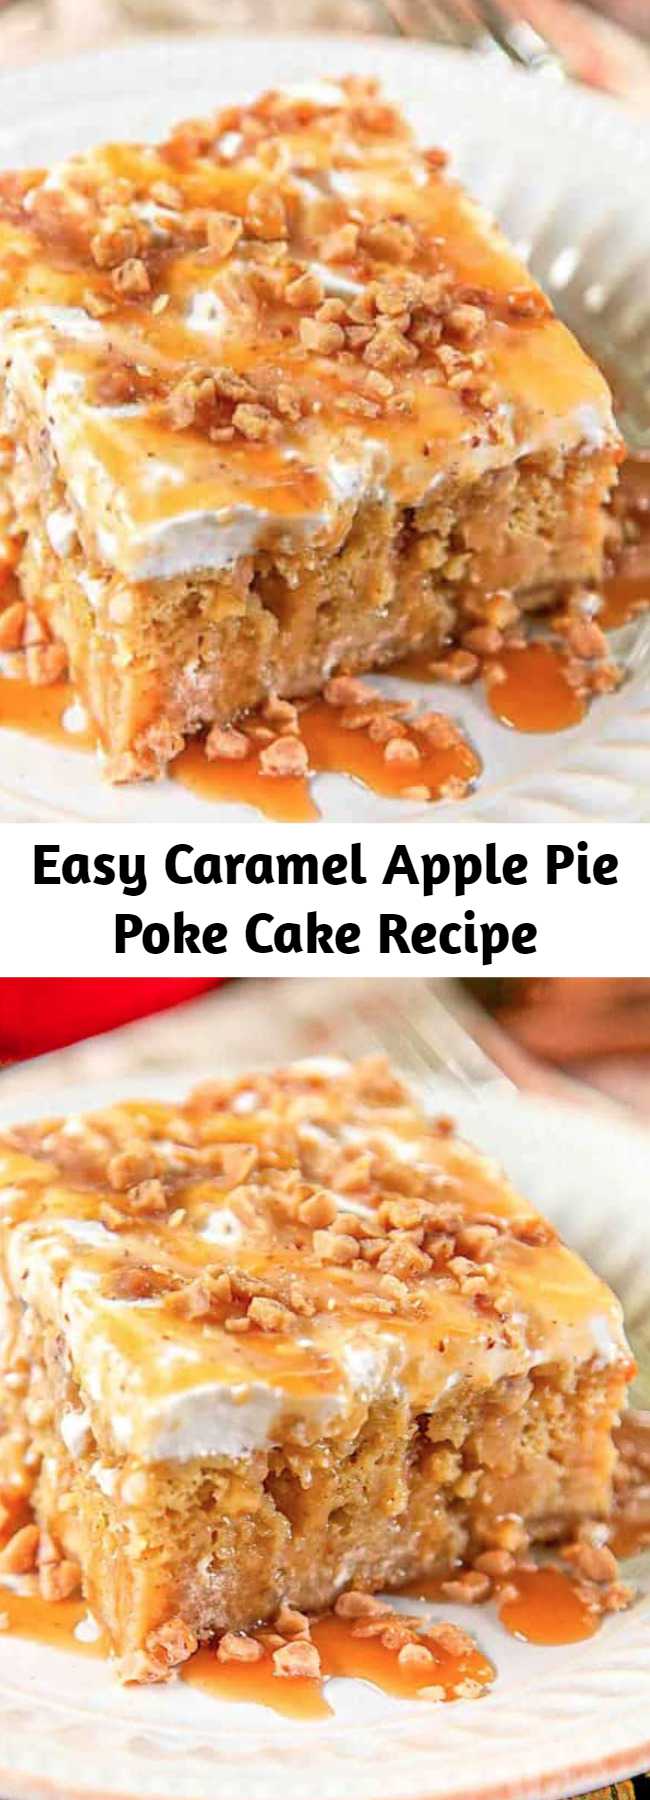 Easy Caramel Apple Pie Poke Cake Recipe - Apple cake soaked in caramel sauce topped with cool whip and toffee bits – AMAZING! Can make ahead of time and refrigerate. It gets better as it sits in the fridge. Super delicious cake!